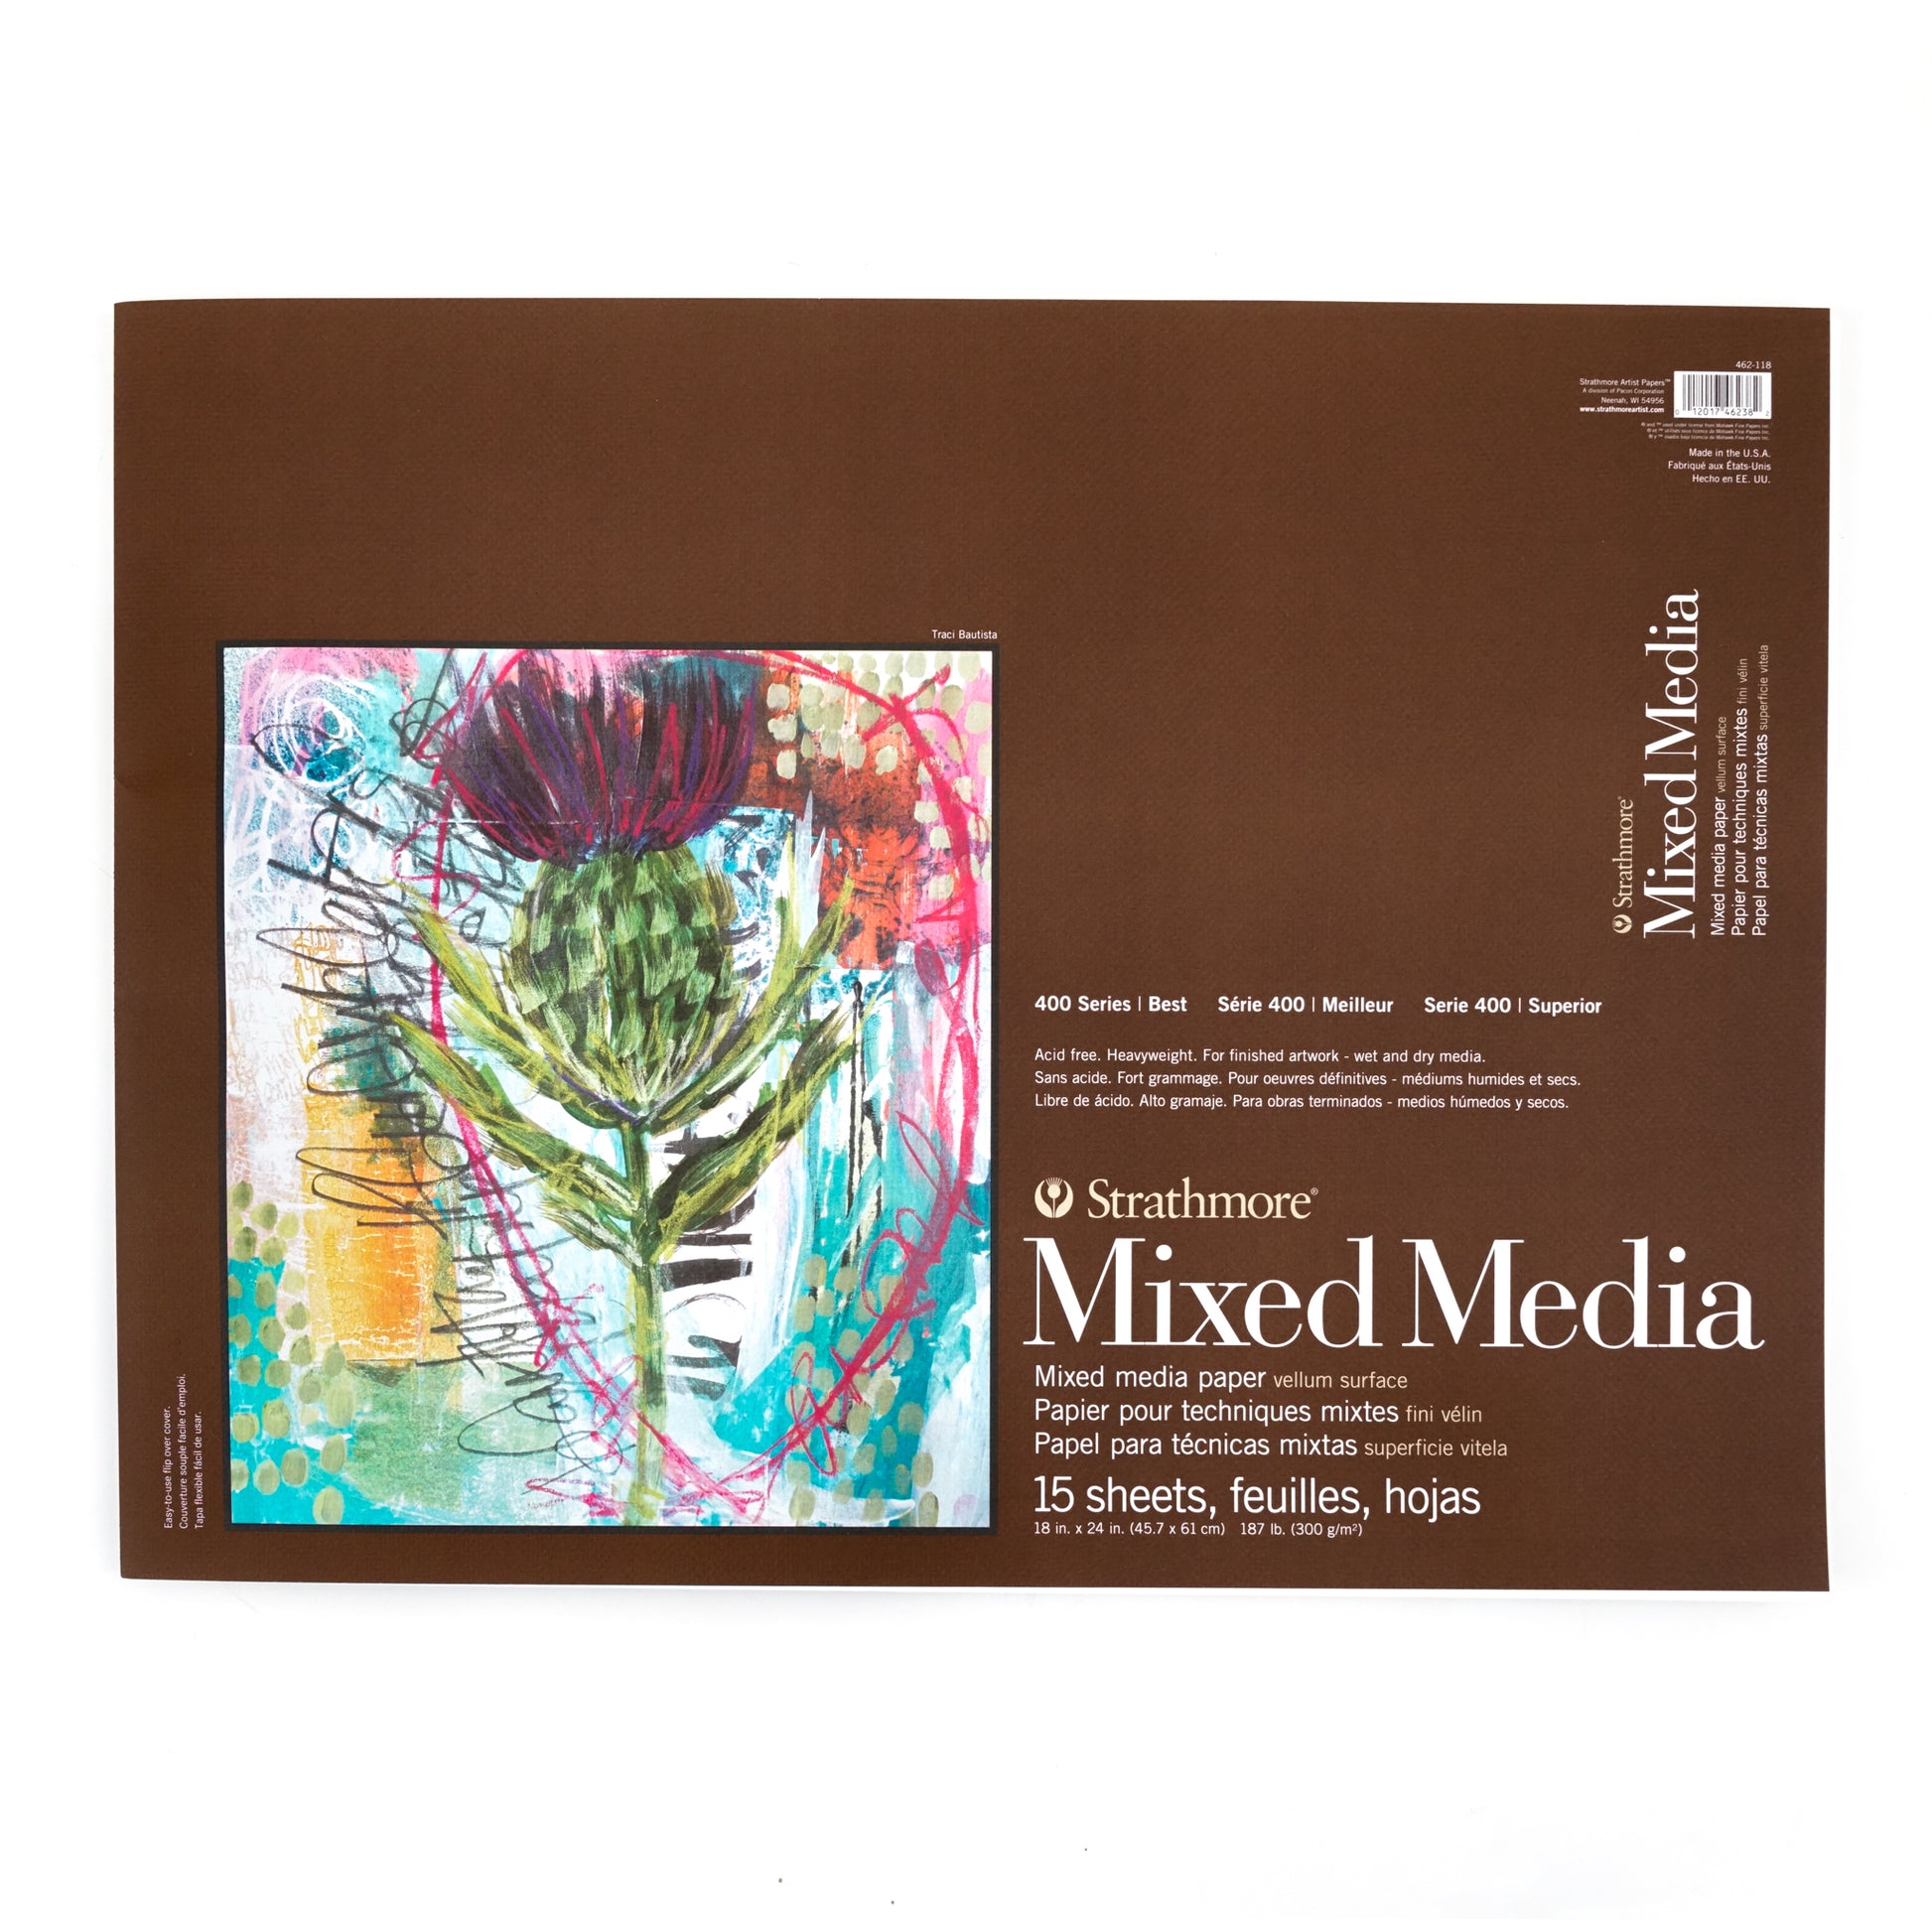 Strathmore Mixed Media Paper Pad - 400 Series - Vellum Surface - 18 x 24 inches by Strathmore - K. A. Artist Shop